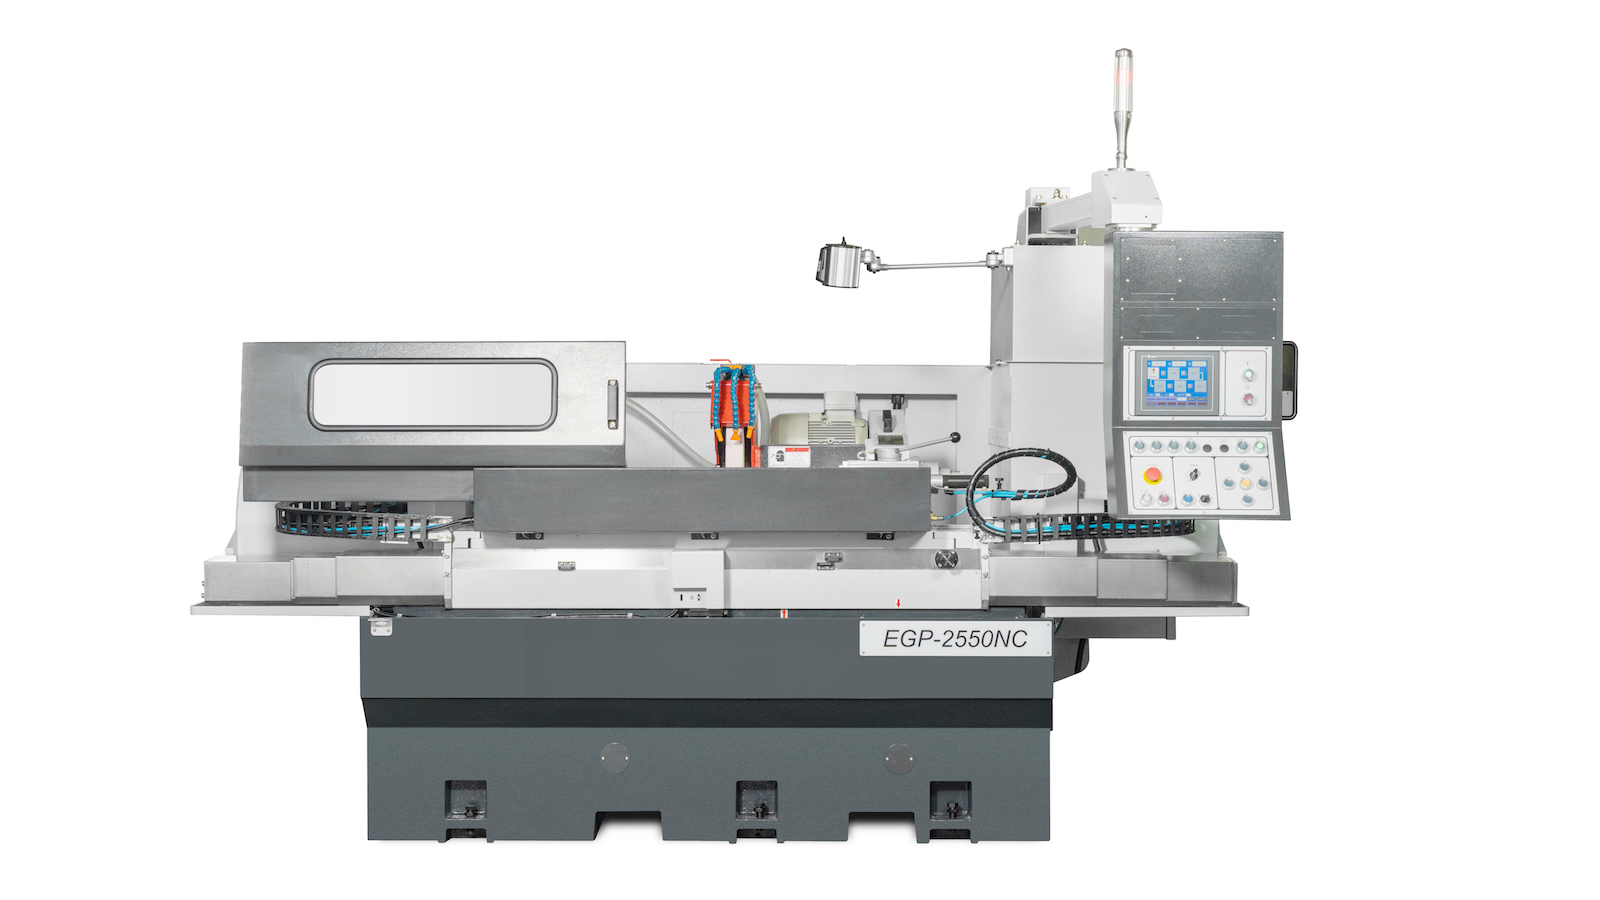 Manufacturers of High Precision Grinding Equipment UK